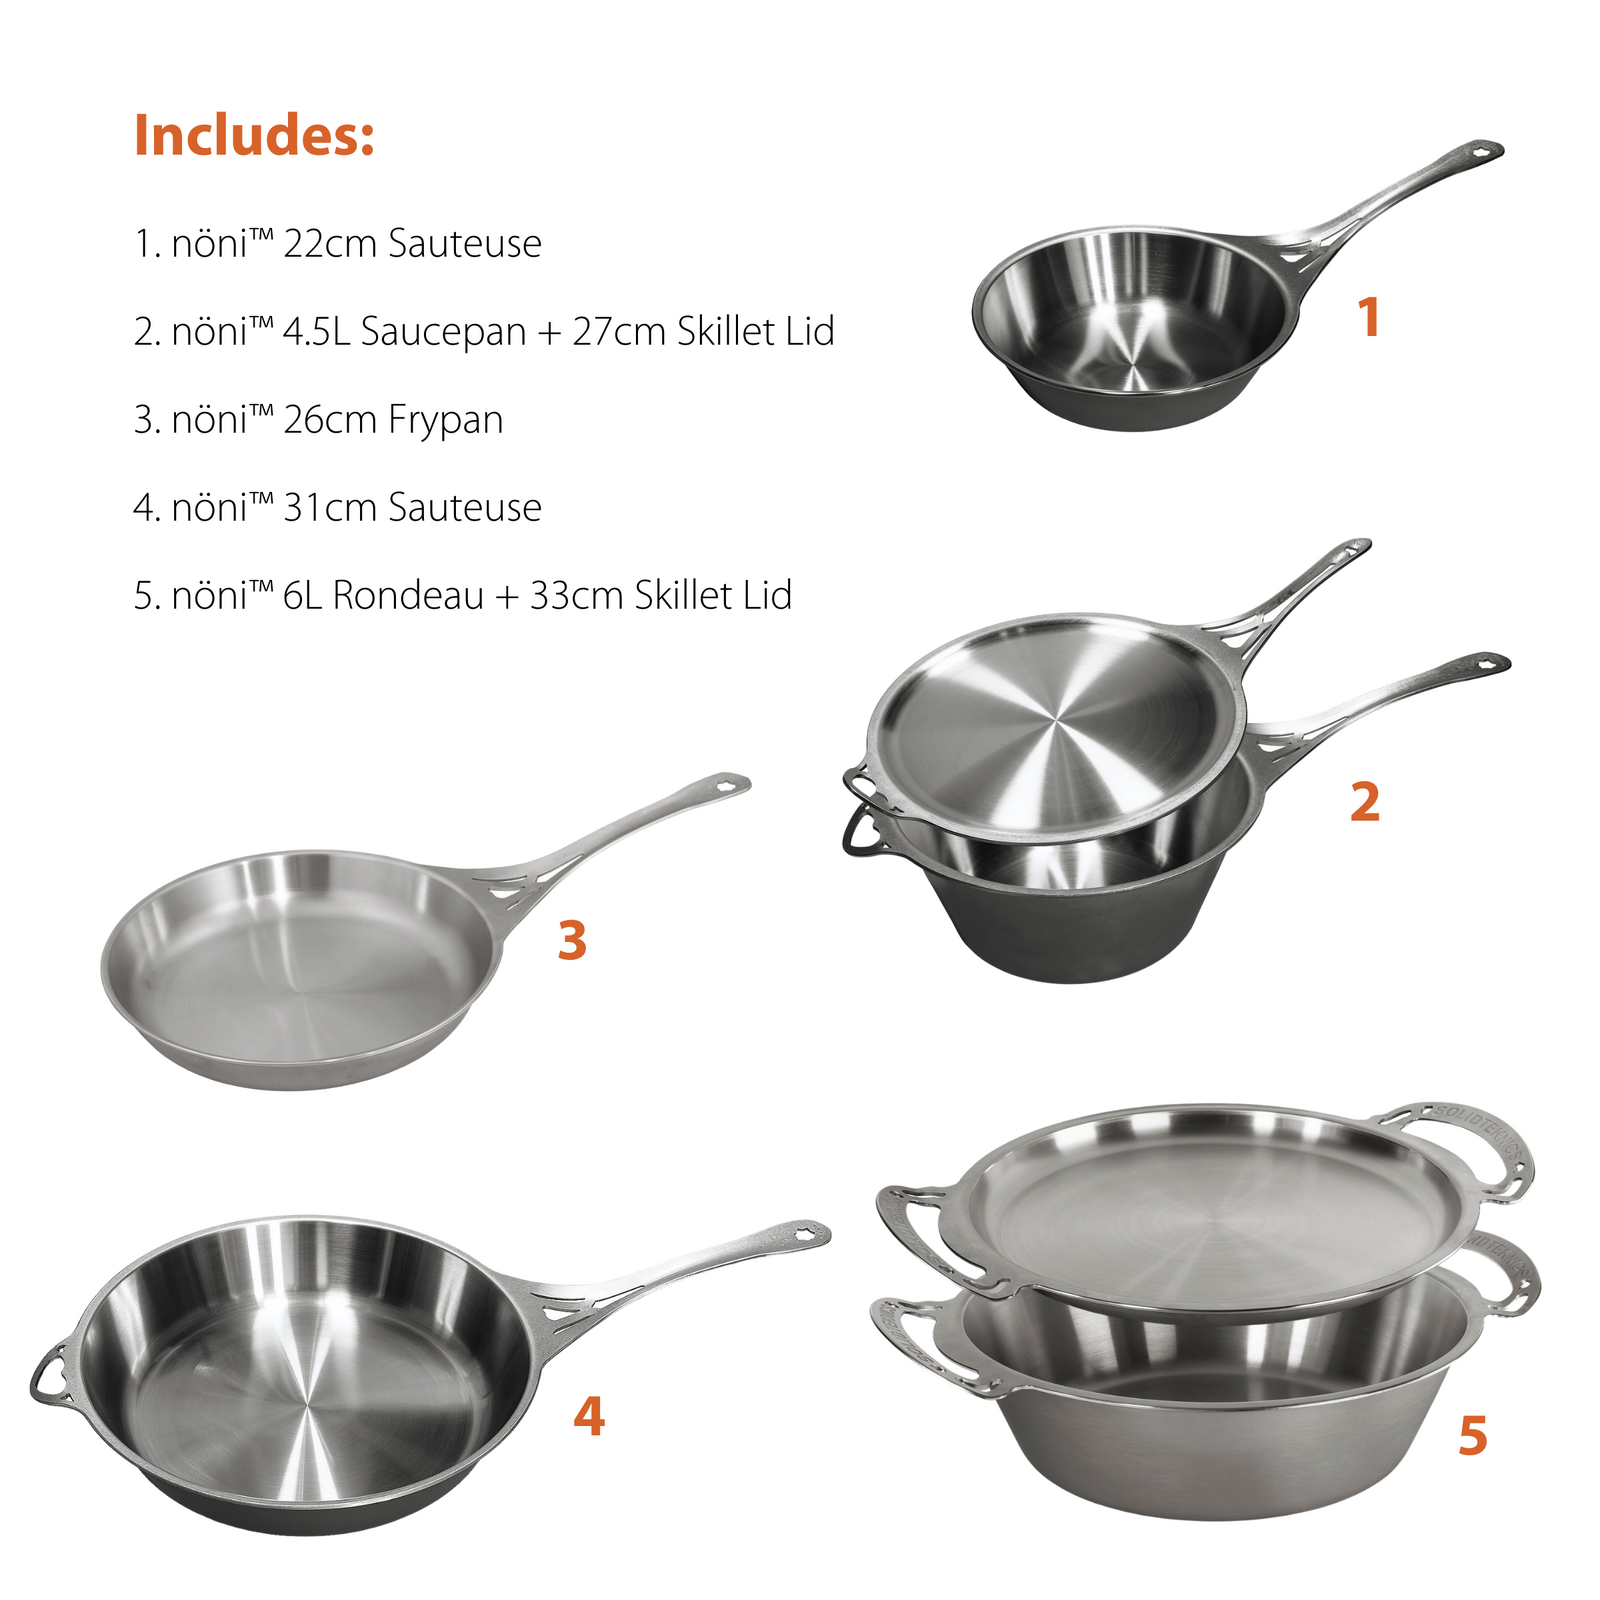 The Ultimate nöni™ Stainless Steel 7 piece Cookware Set! Australian-made by  Solidteknics